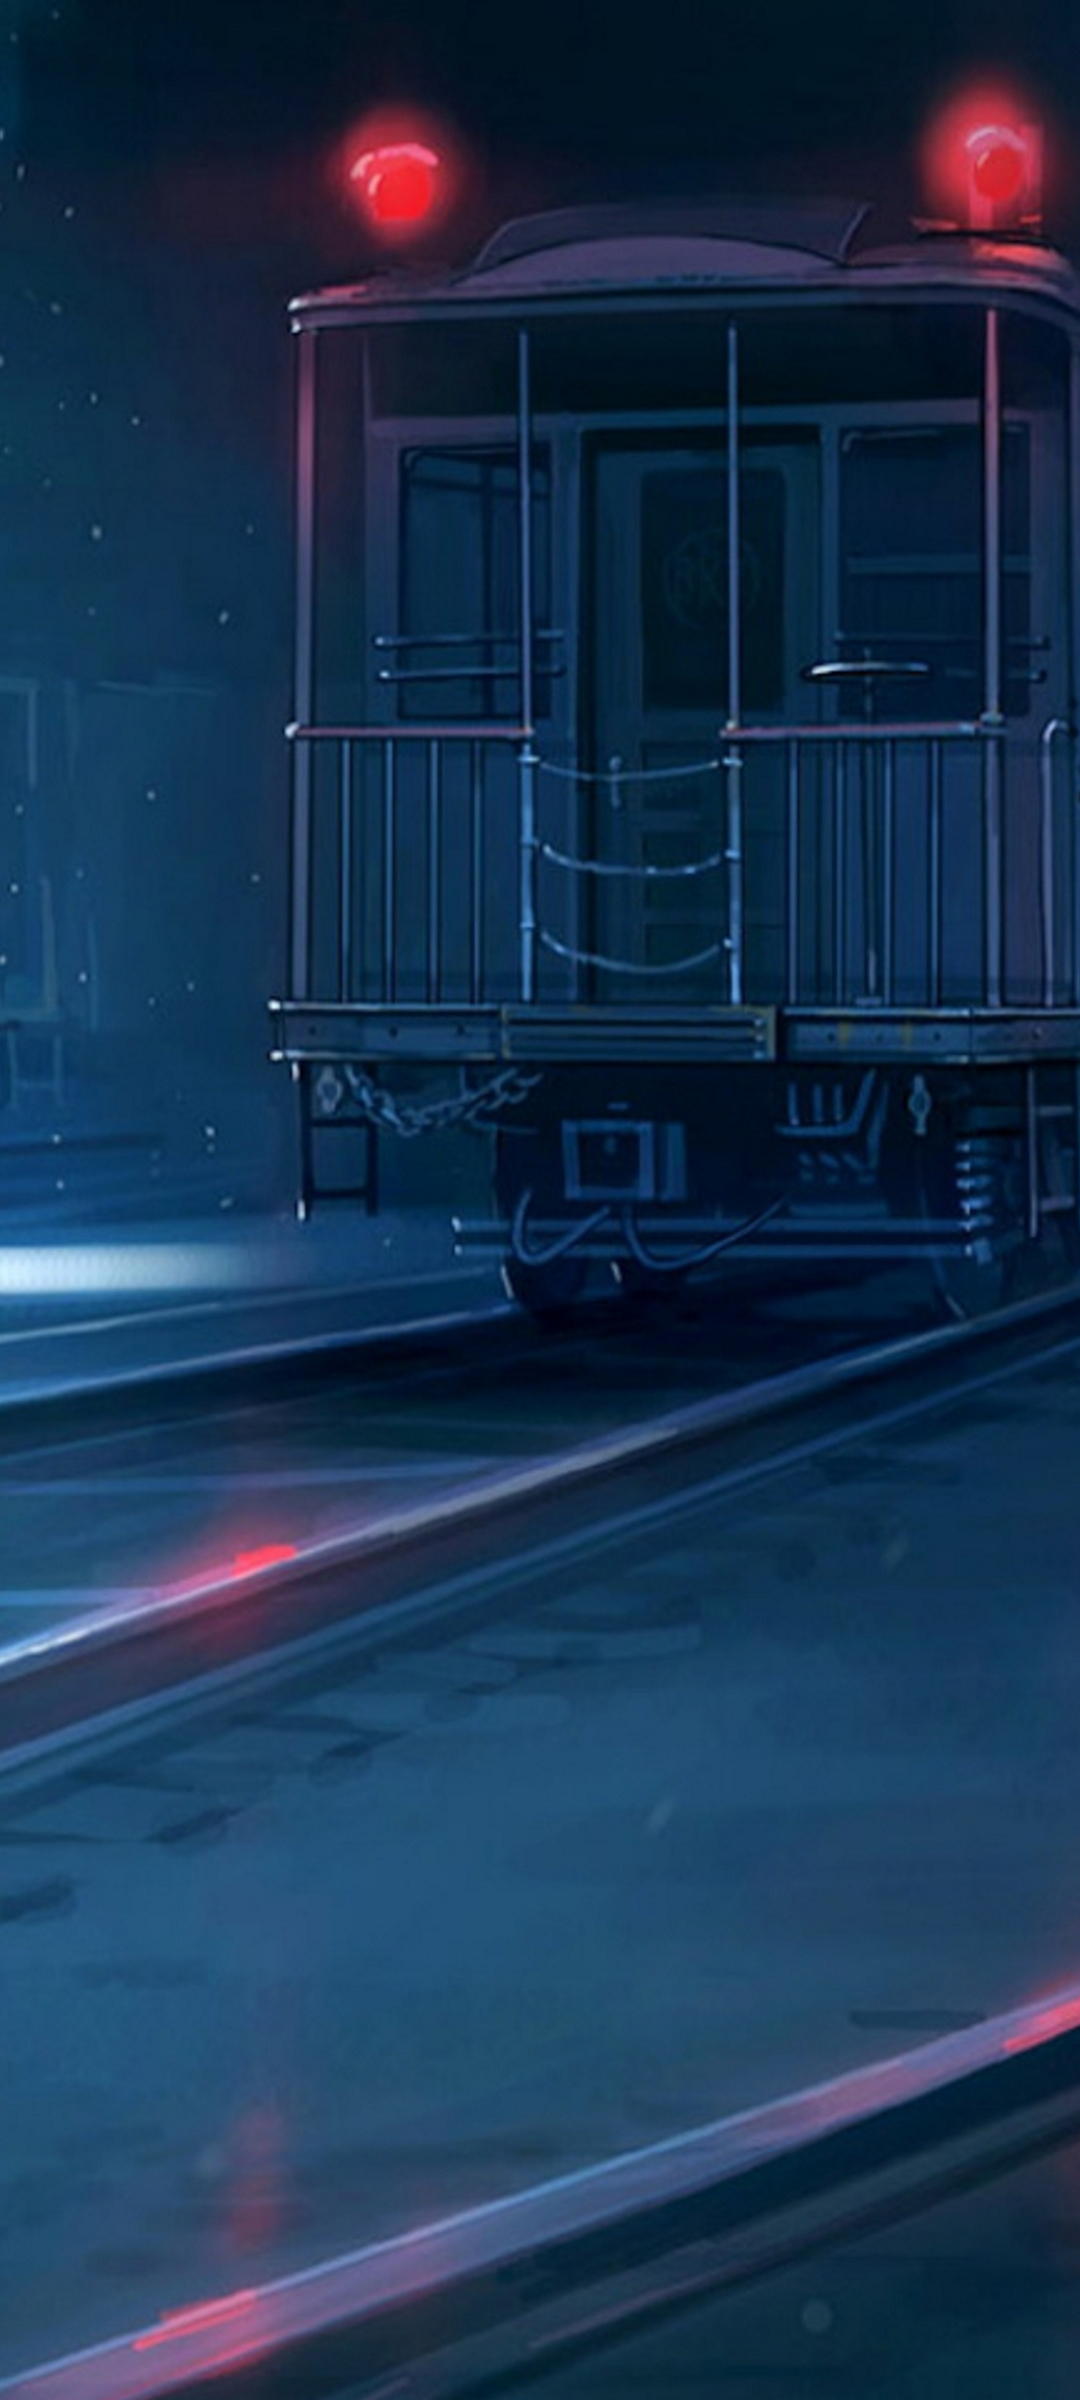 A train is on the tracks at night - 1080x2400